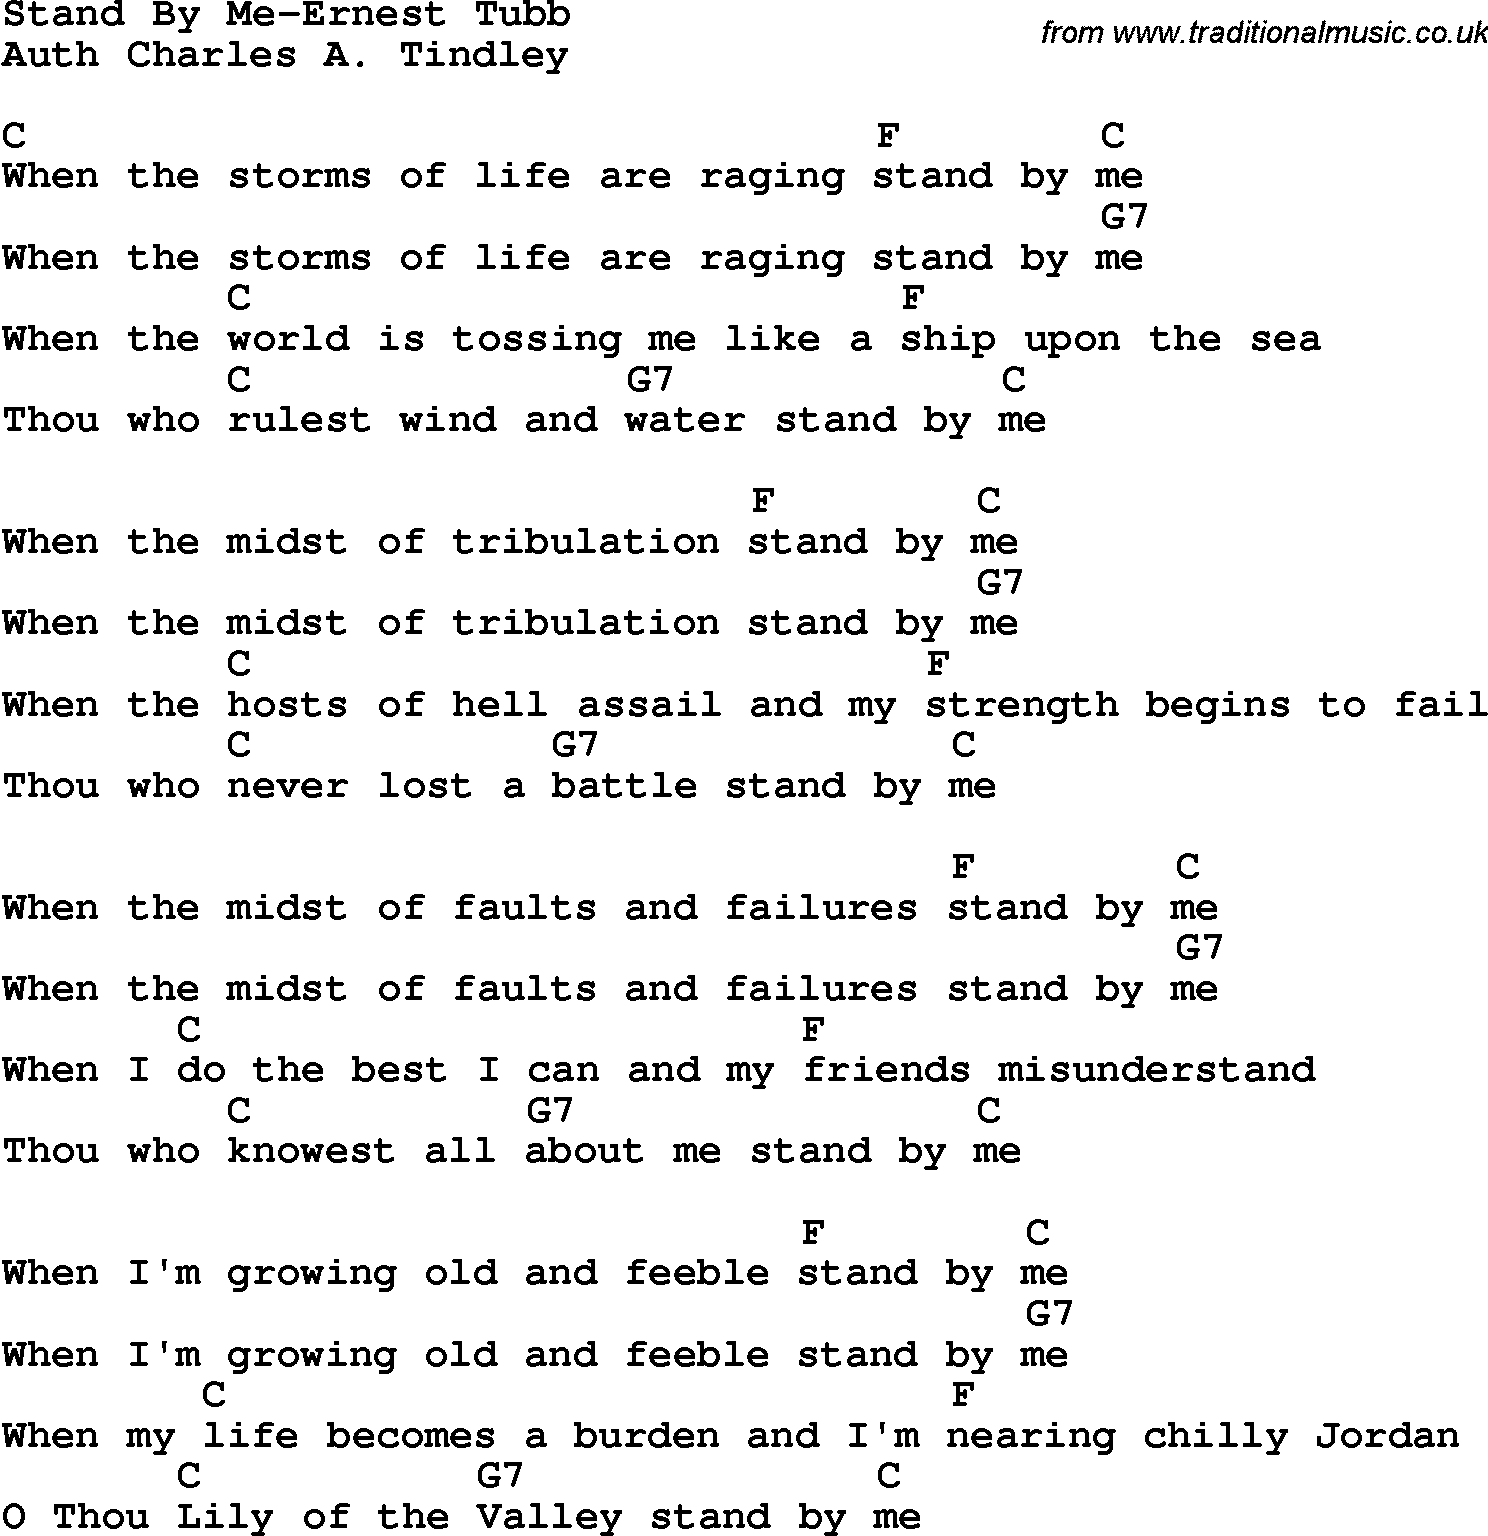 Country, Southern and Bluegrass Gospel Song Stand By Me-Ernest Tubb lyrics and chords